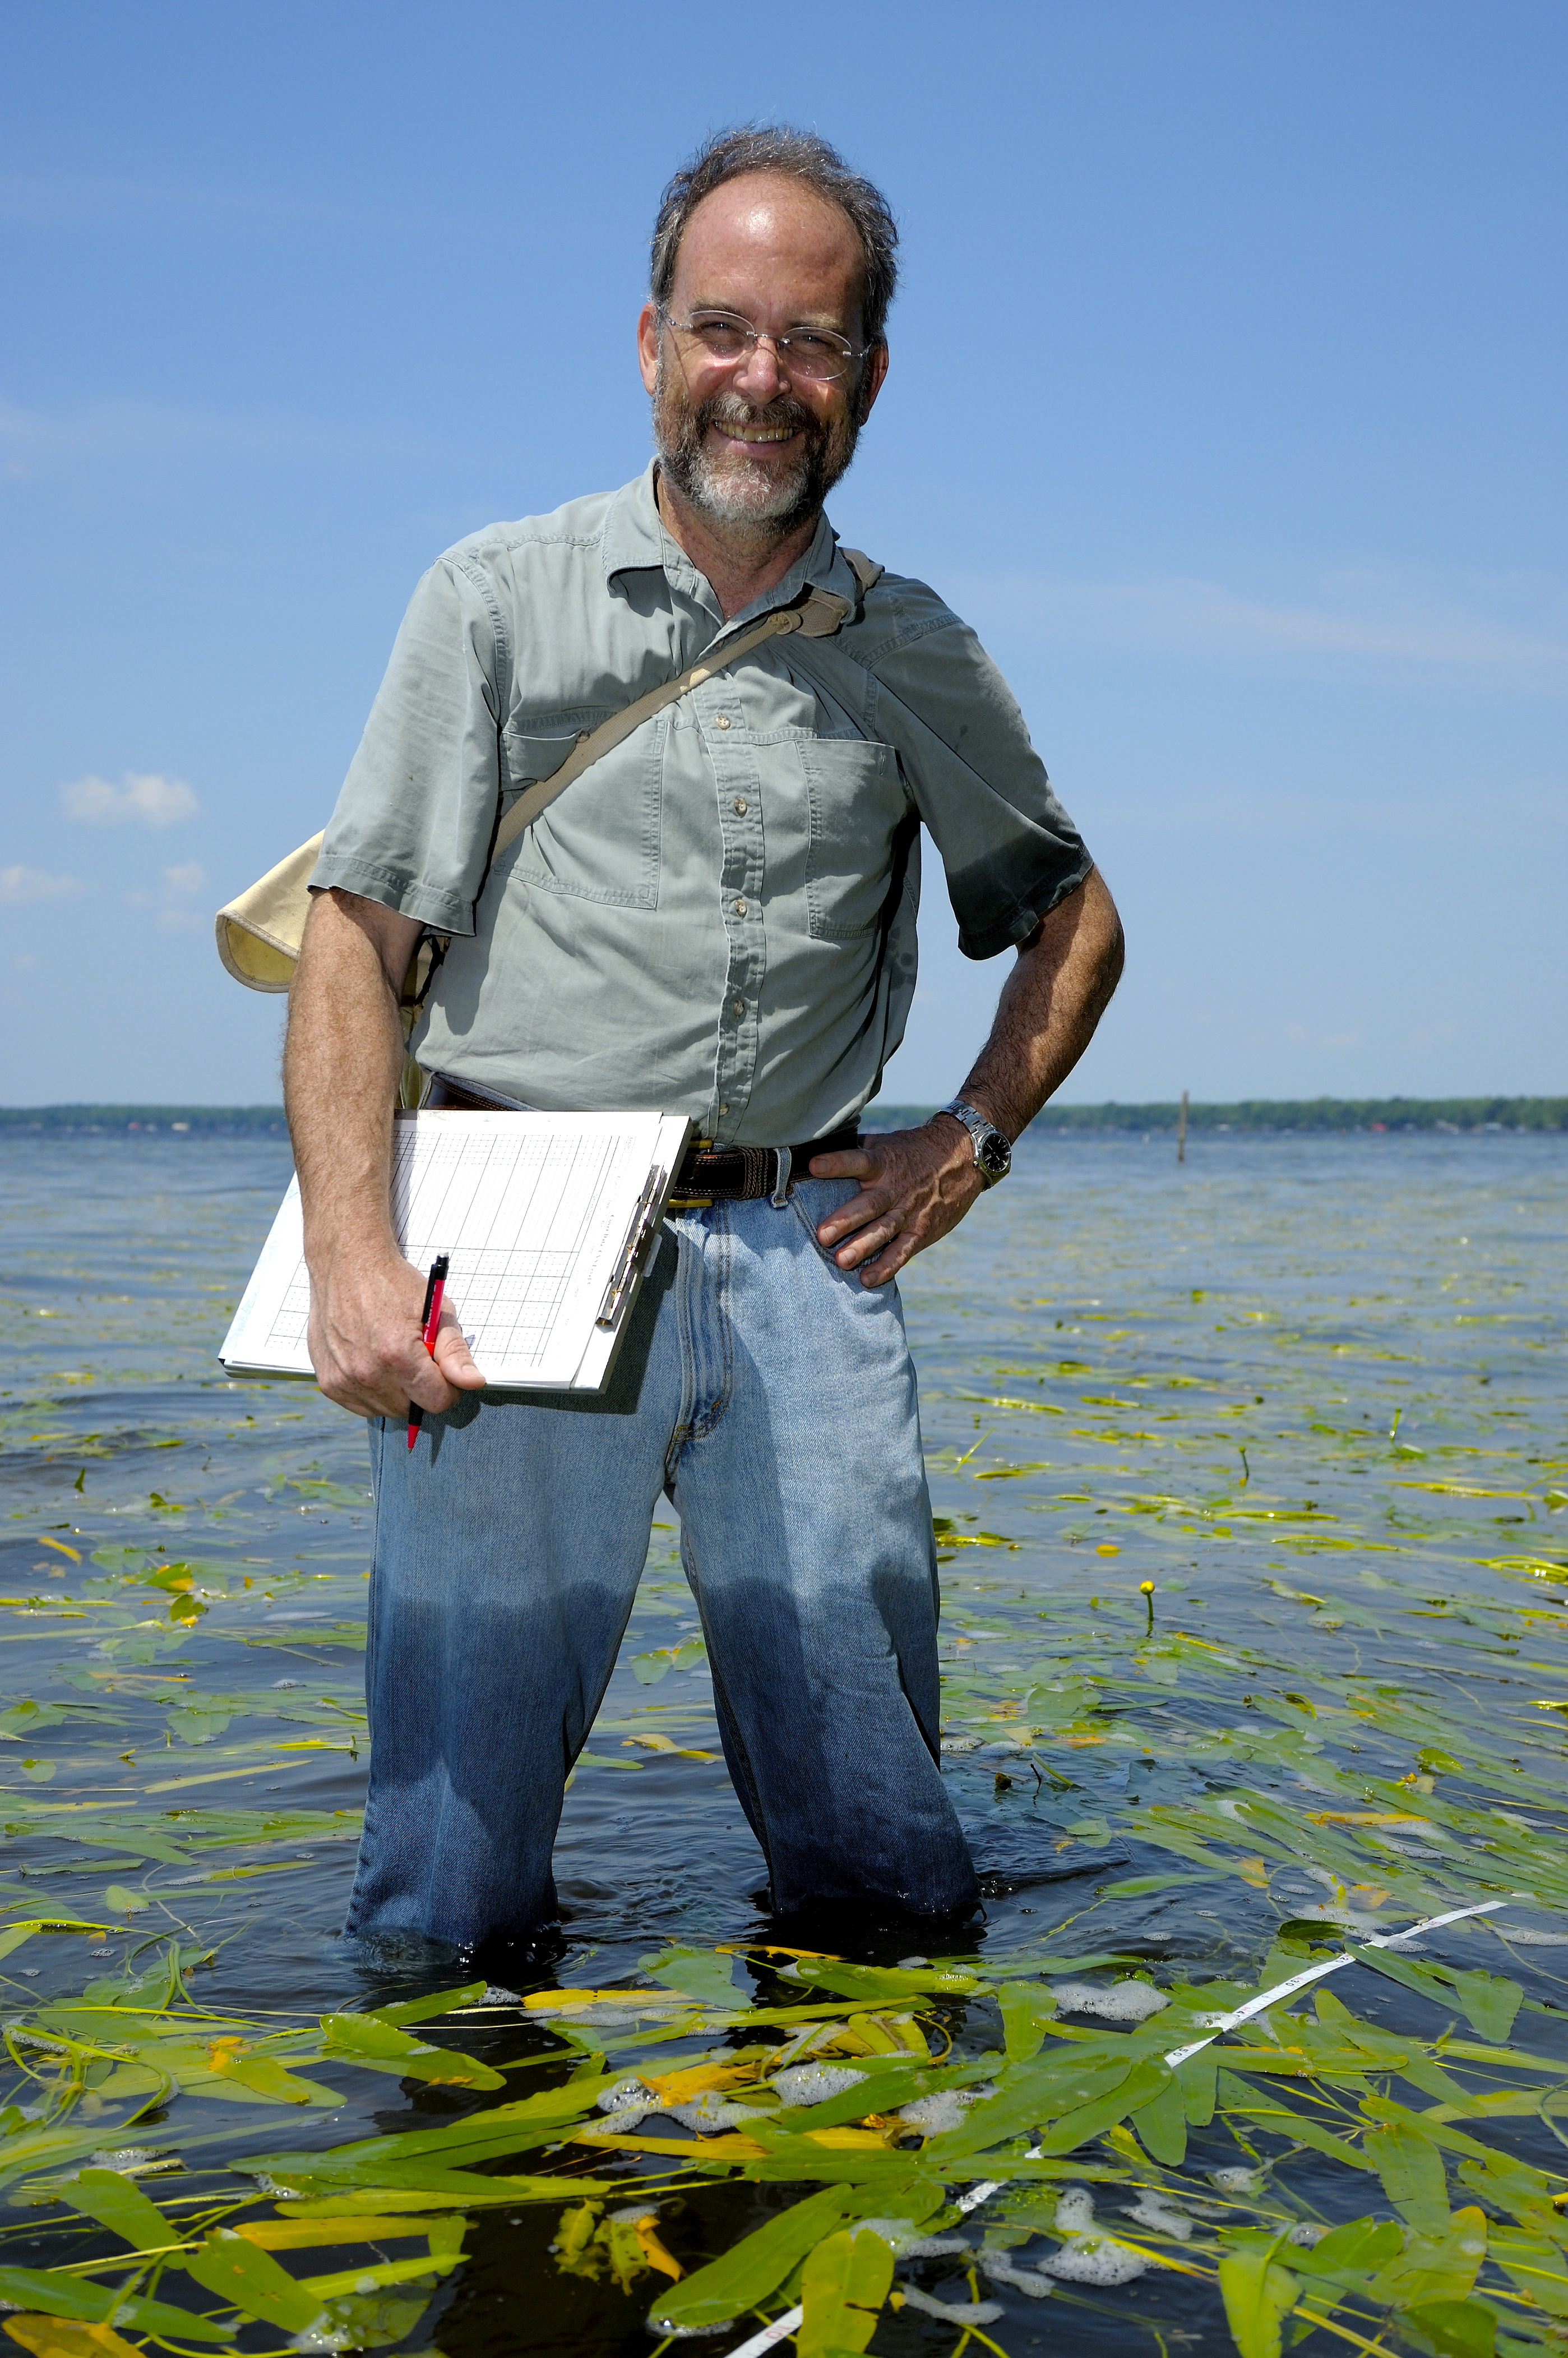 After more than a decade as a natural heritage botanist and ecologist, Alan Weakley is now the herbarium director of the North Carolina Botanical Garden and an assistant professor at UNC.